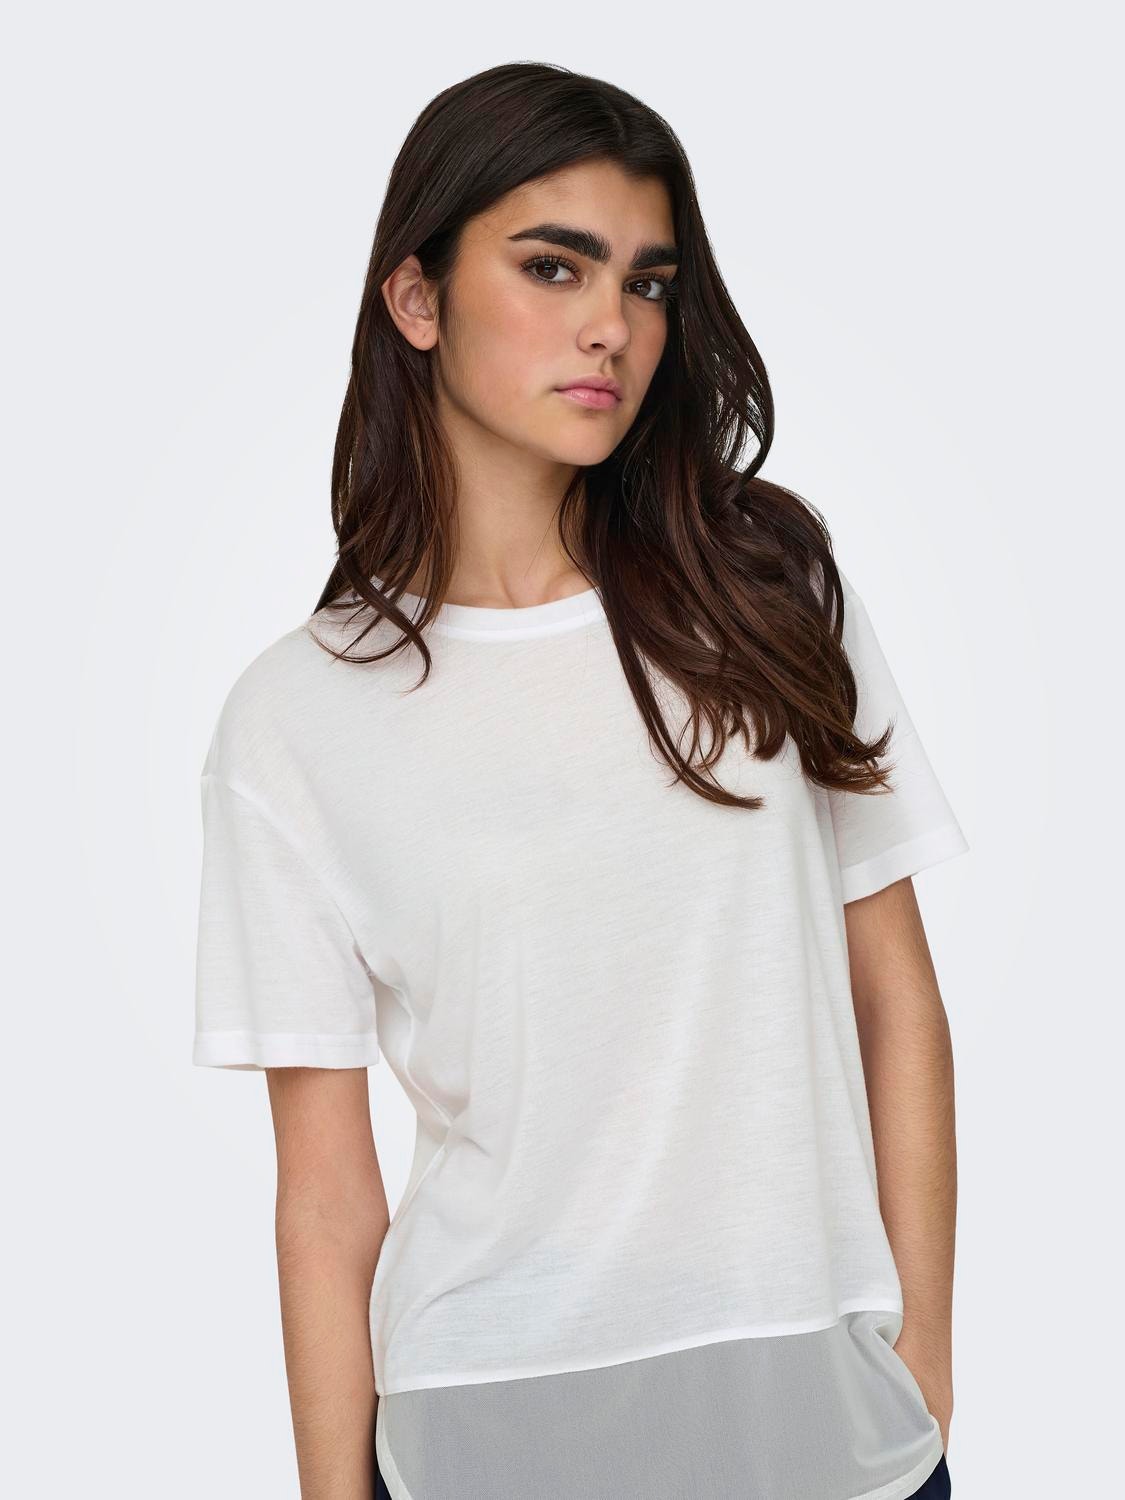 ONLY Loose Fit Round Neck Dropped shoulders T-Shirt -White - 15311487